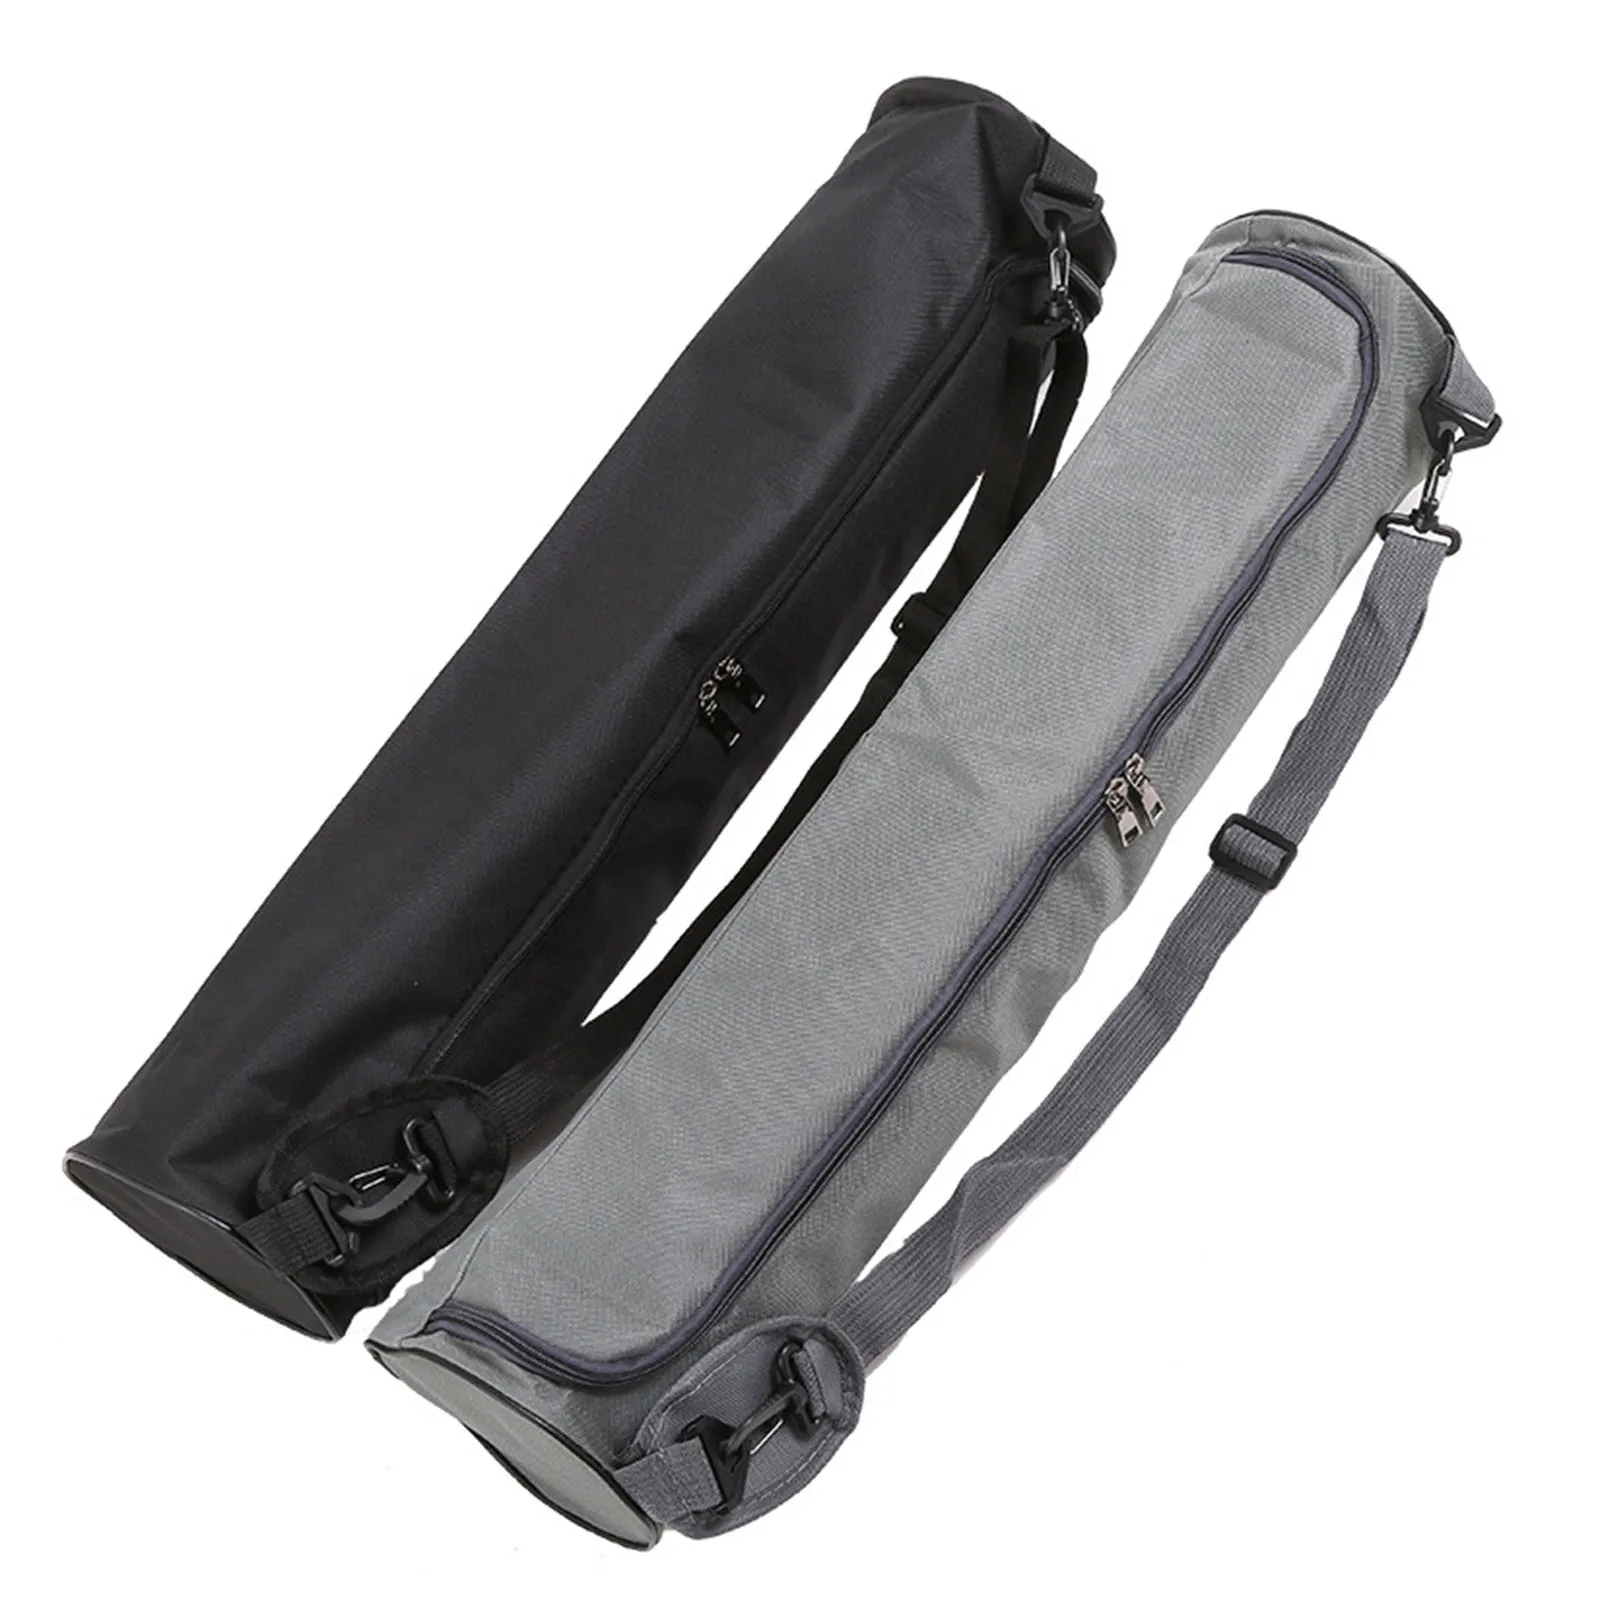 Yoga Mat Bag with Shoulder Strap for Exercise Waterproof Oxford Mat Bag and Strap Sling for Carrying Your Workout Gear